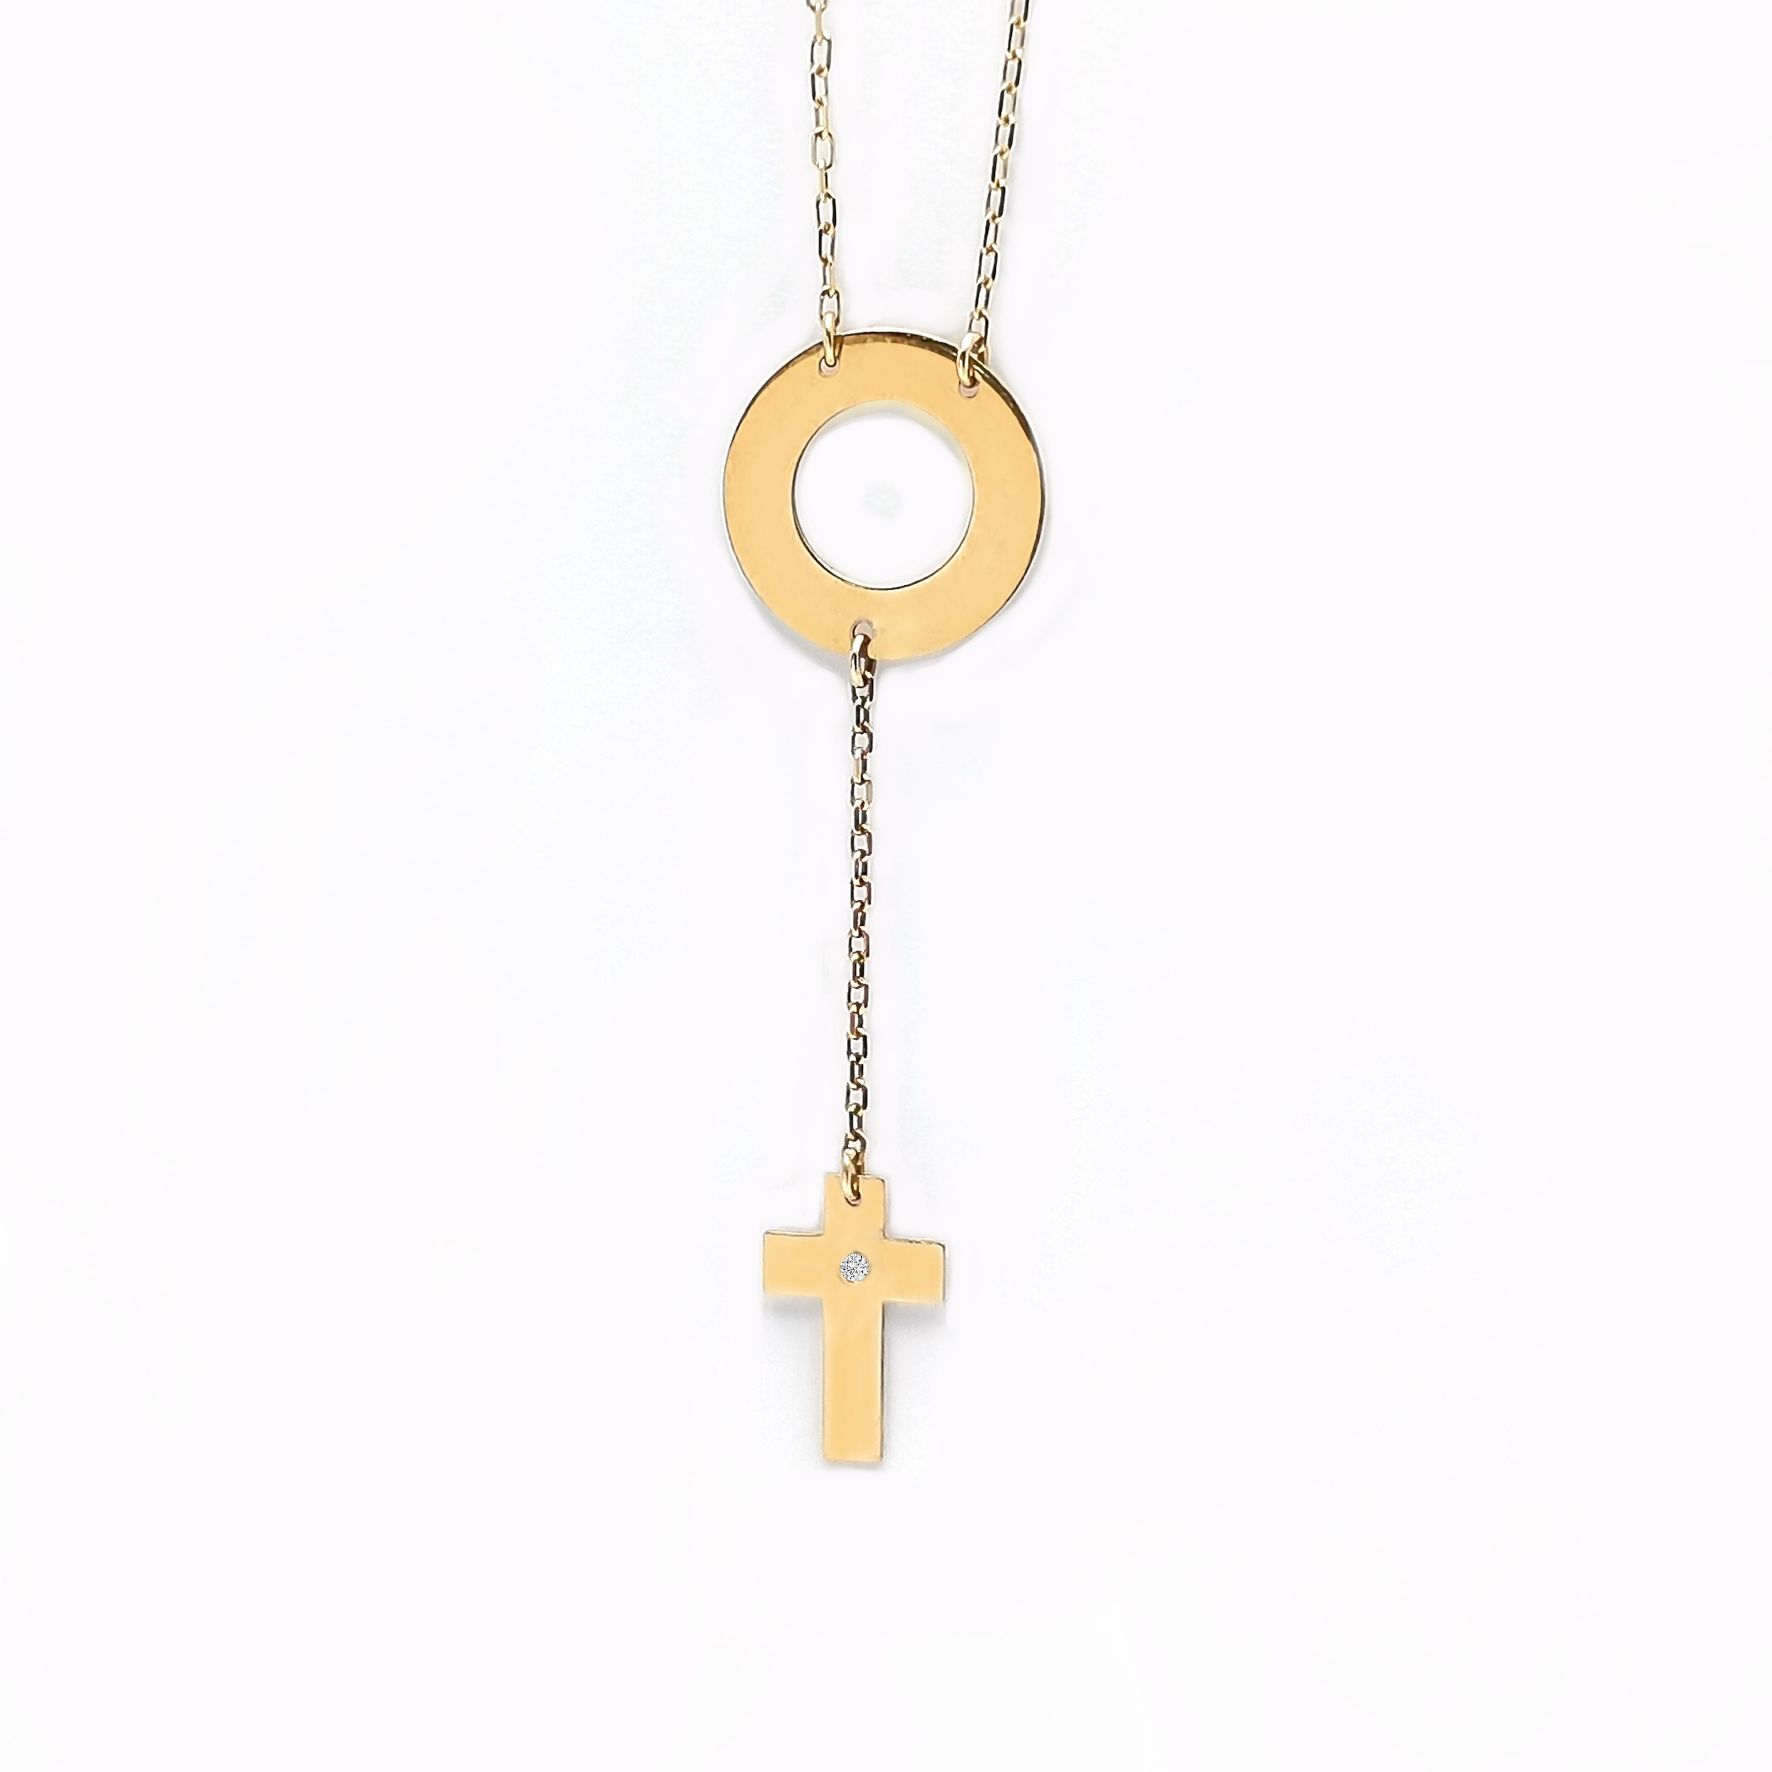 18K Yellow Gold Pendant with Chain [XN-#393]